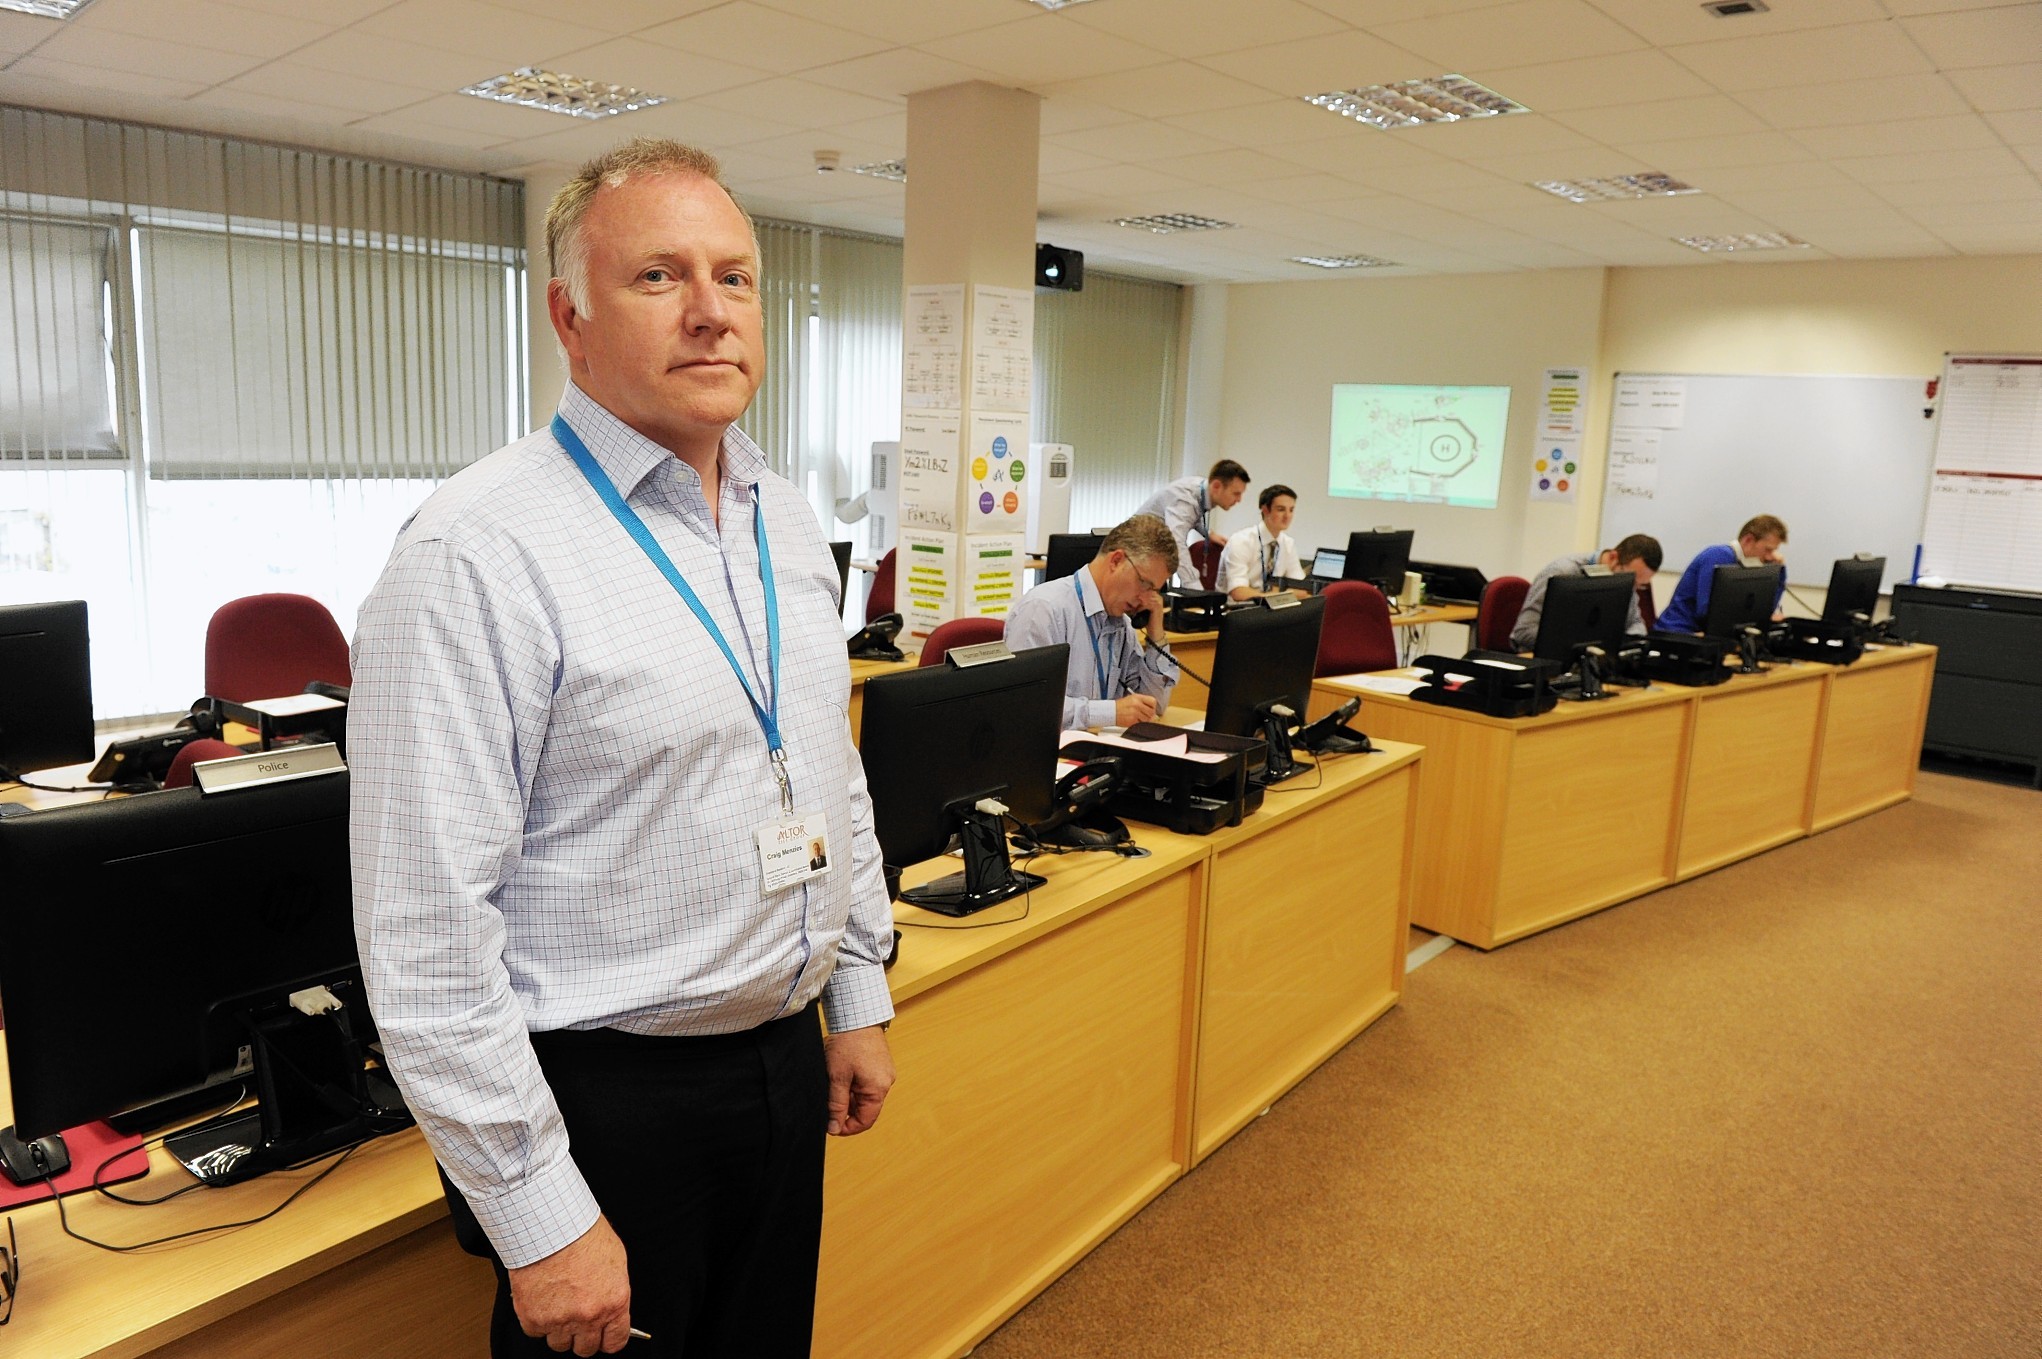 Craig Menzies, head of Restrata's UK emergency response and crisis management business